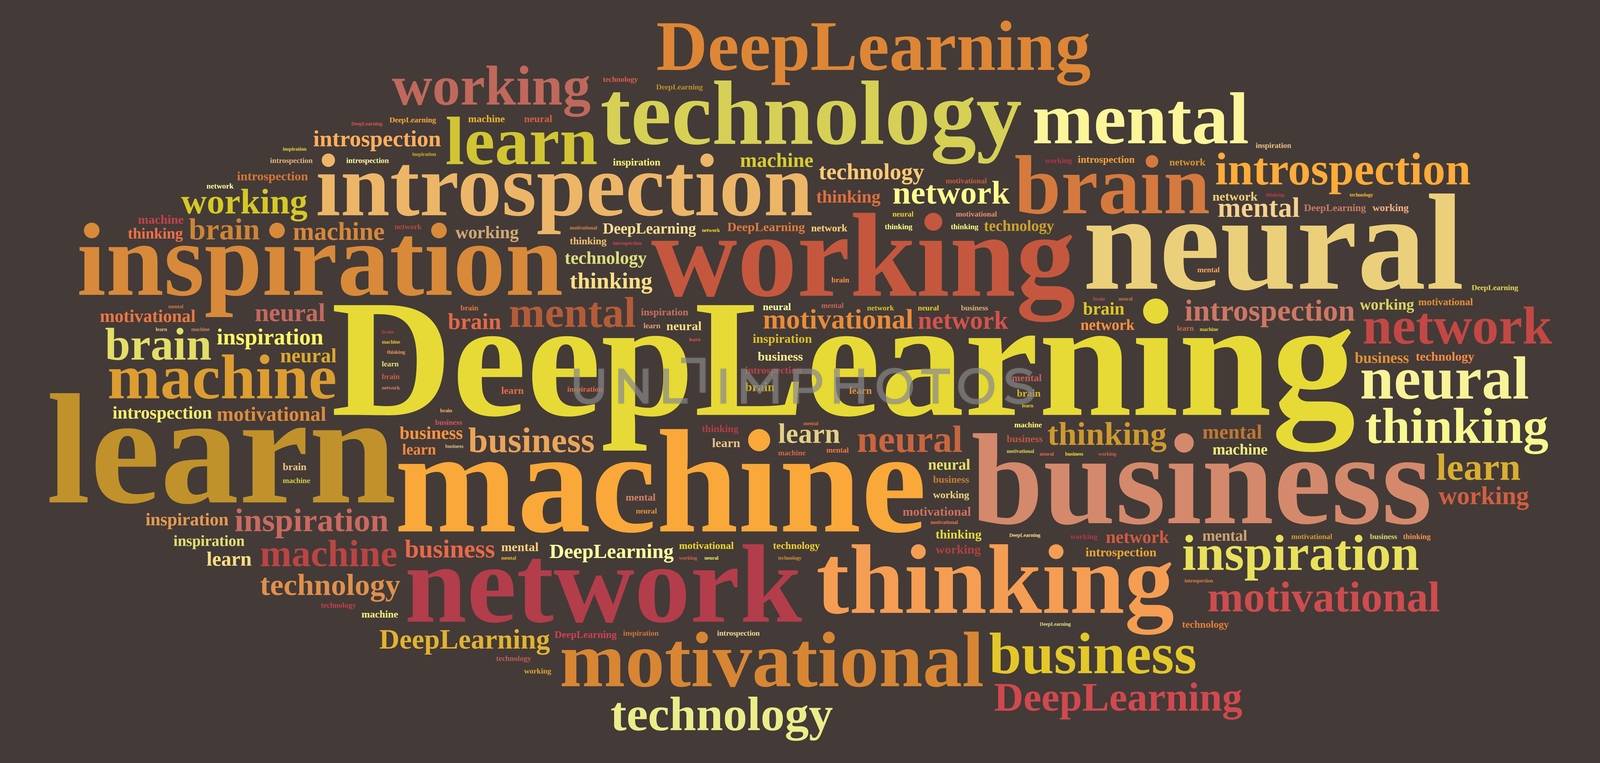 Illustration with word cloud on Deep Learning.